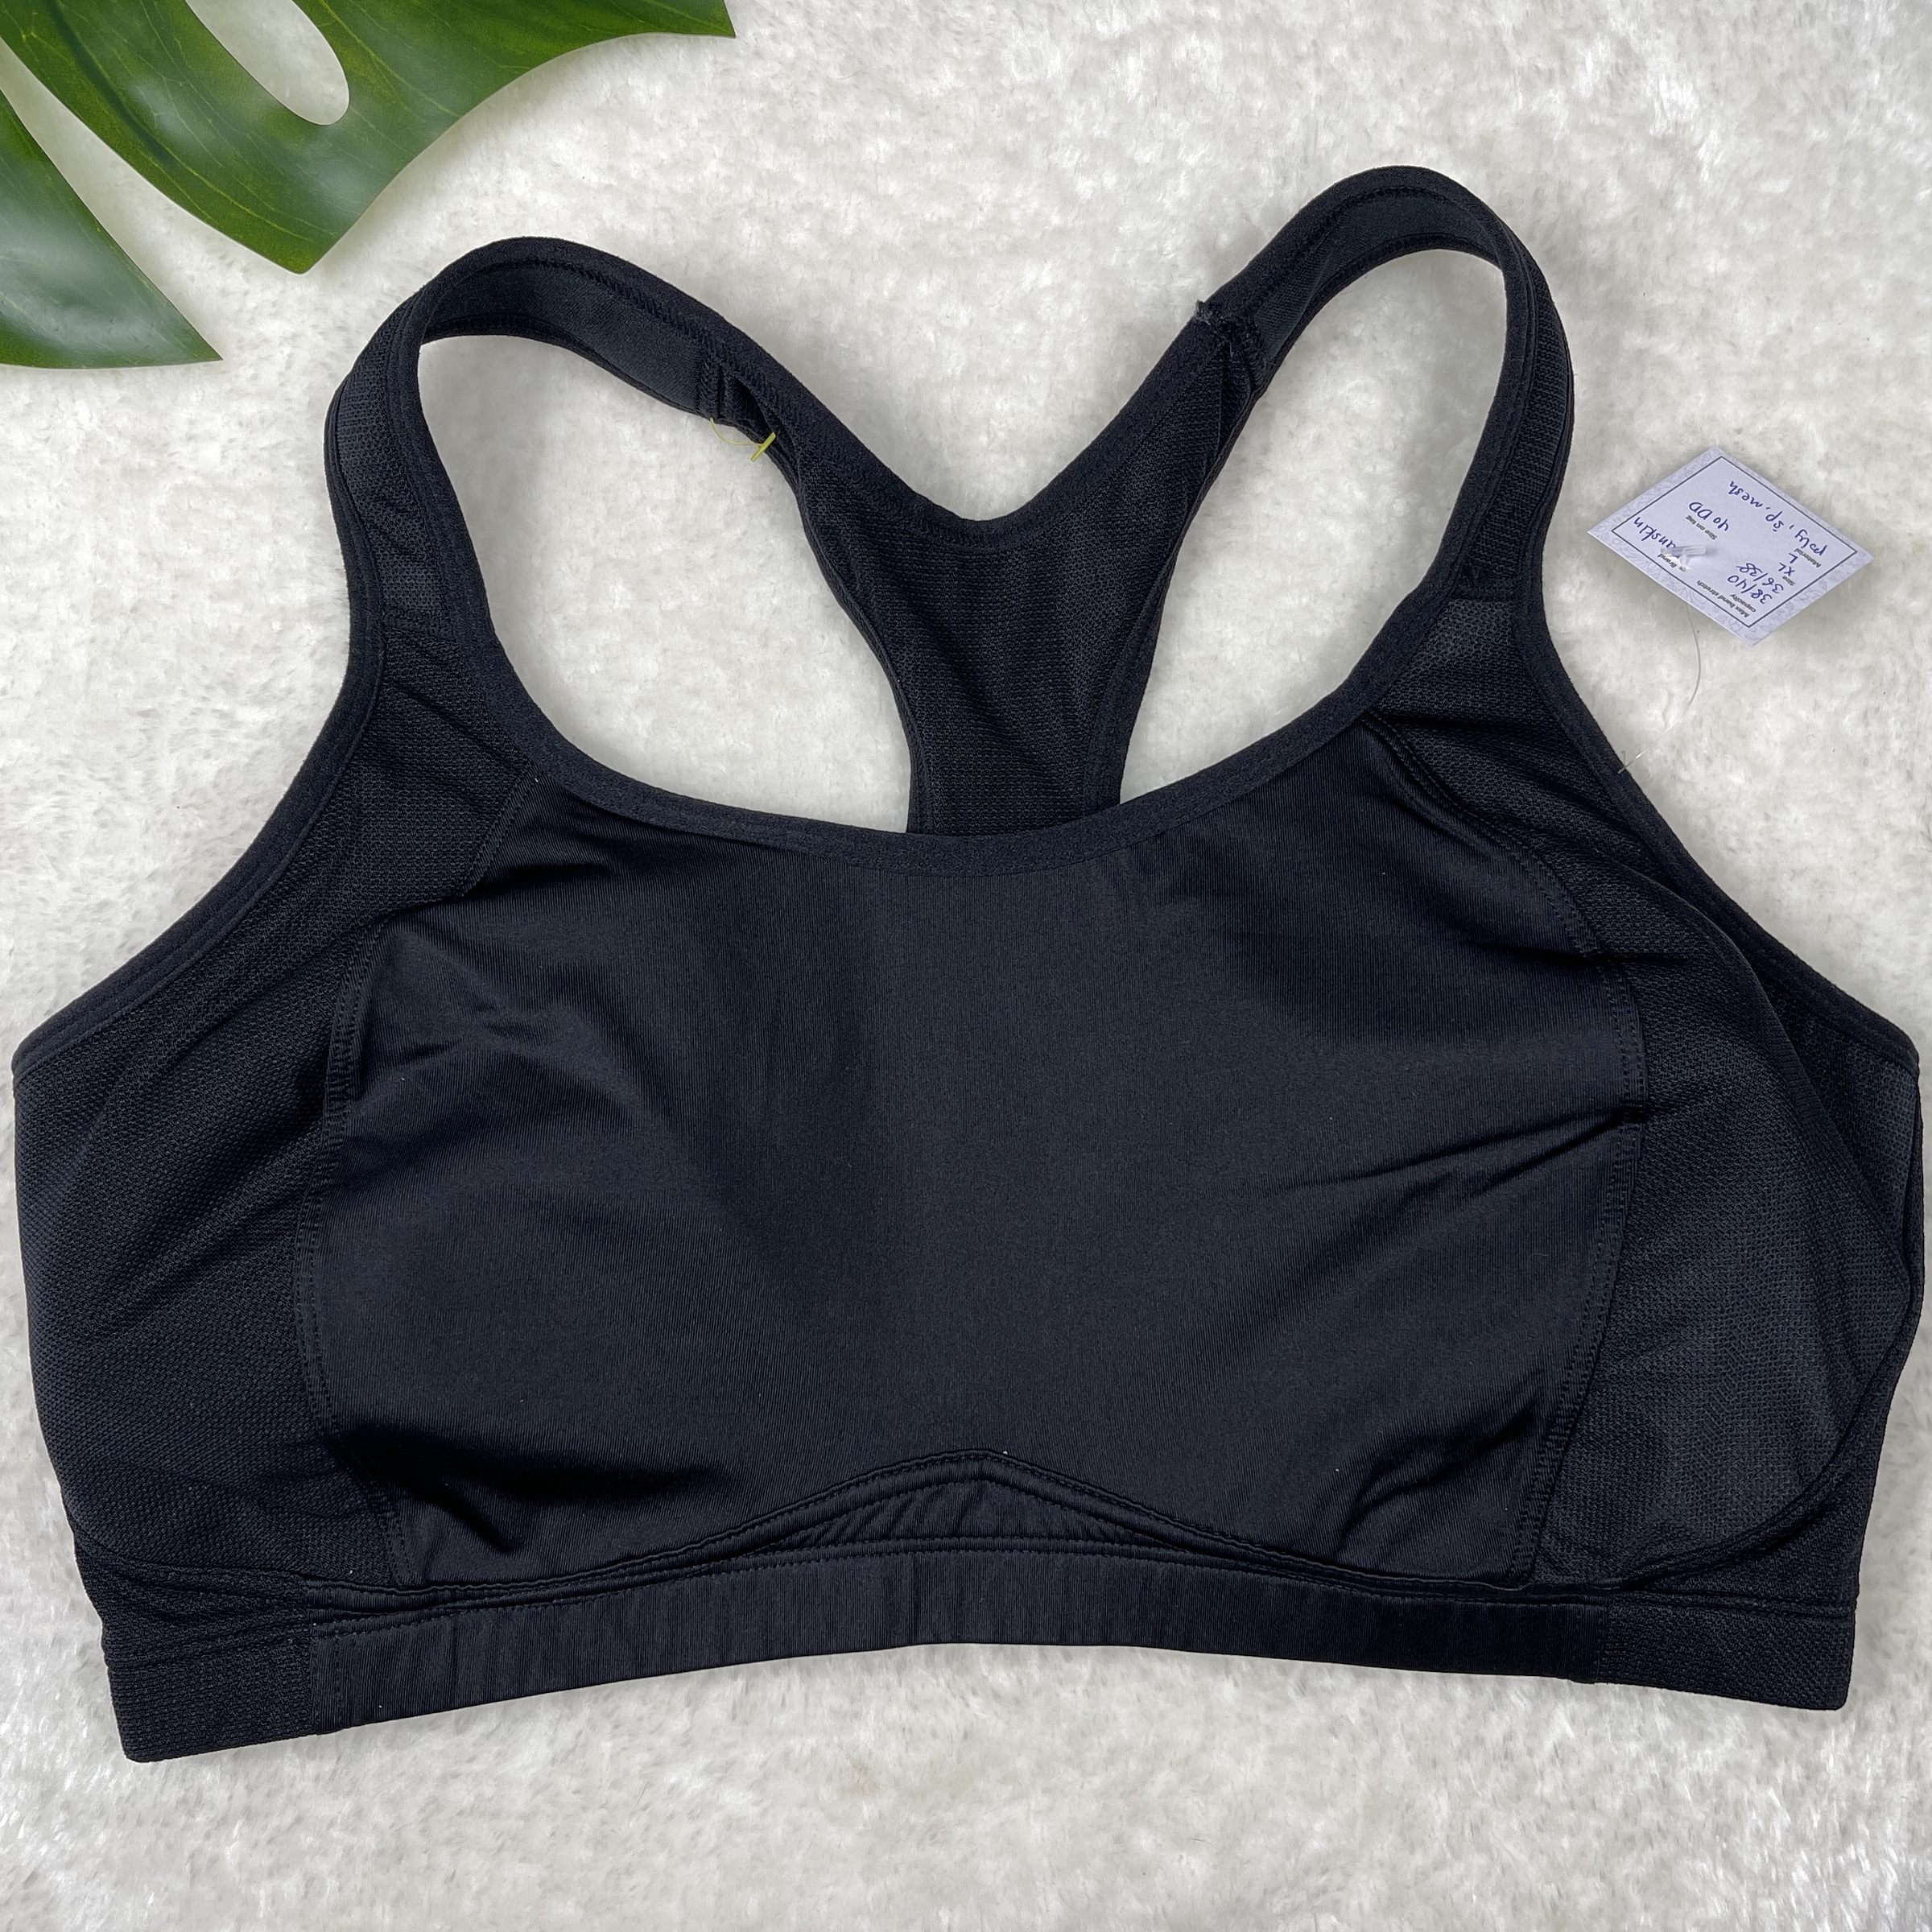 Sports bras for sale editorial stock photo. Image of sale - 110501293